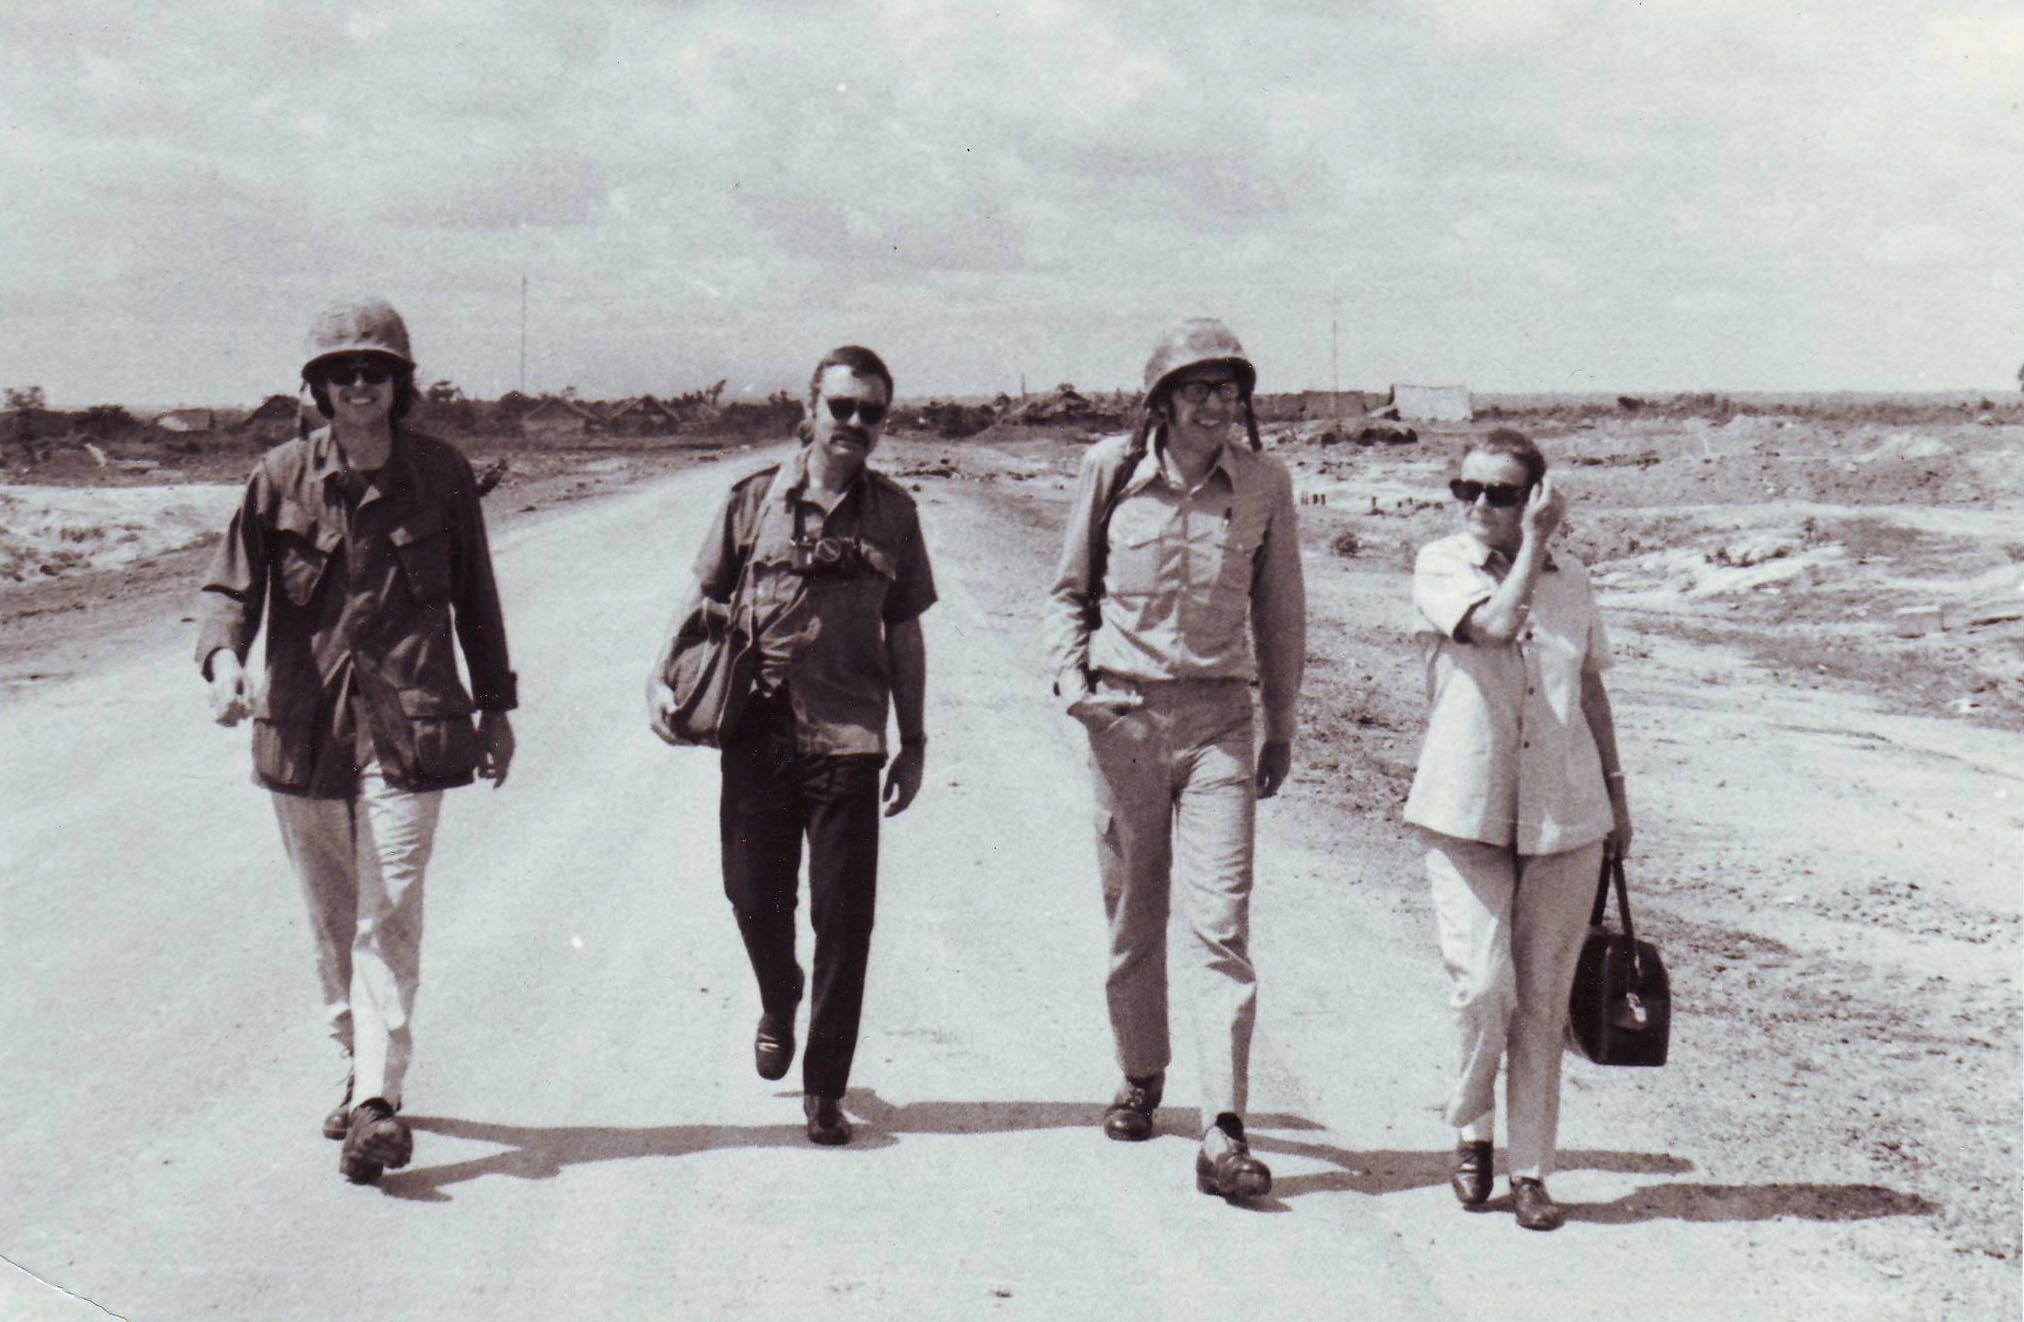 Clare Hollingworth with colleagues in Vietnam in the 1970s (Clare Hollingworth Collection)